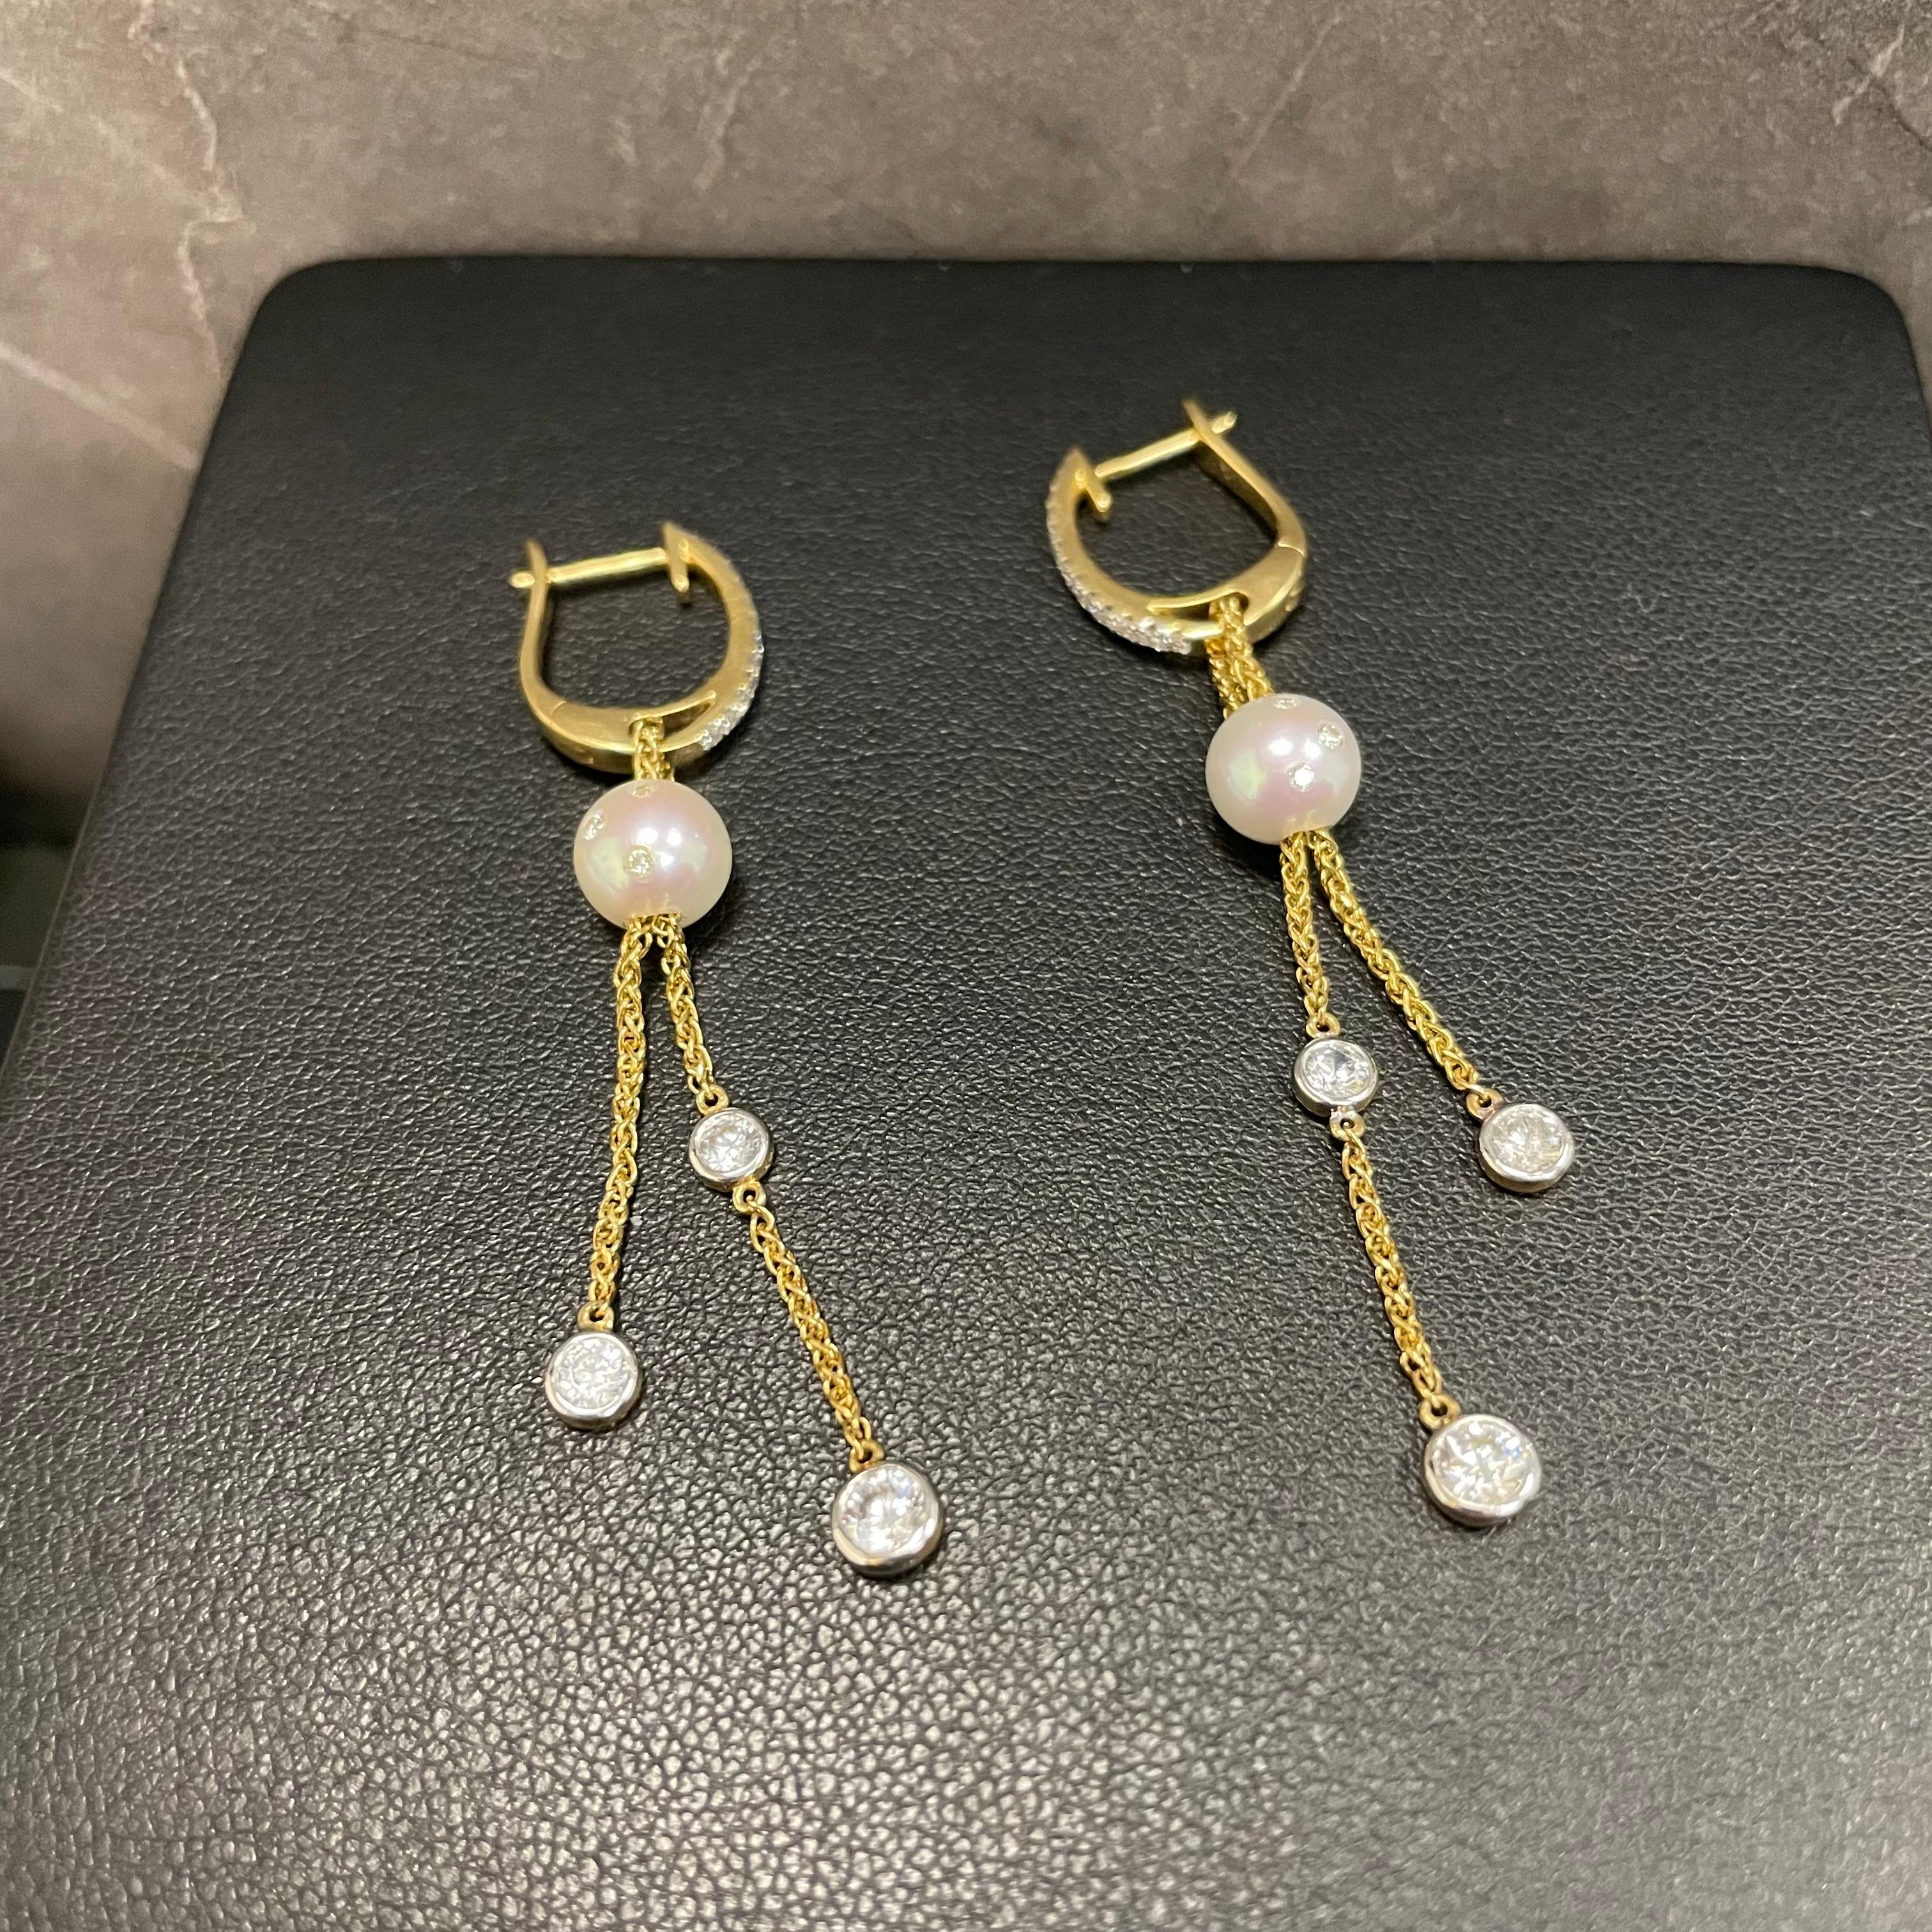 These earrings feature 15.14mm freshwater white button pearl with white sapphire set inside, suspending two diamond-set chain with different lengths, set with 18K yellow gold with diamond huggie.